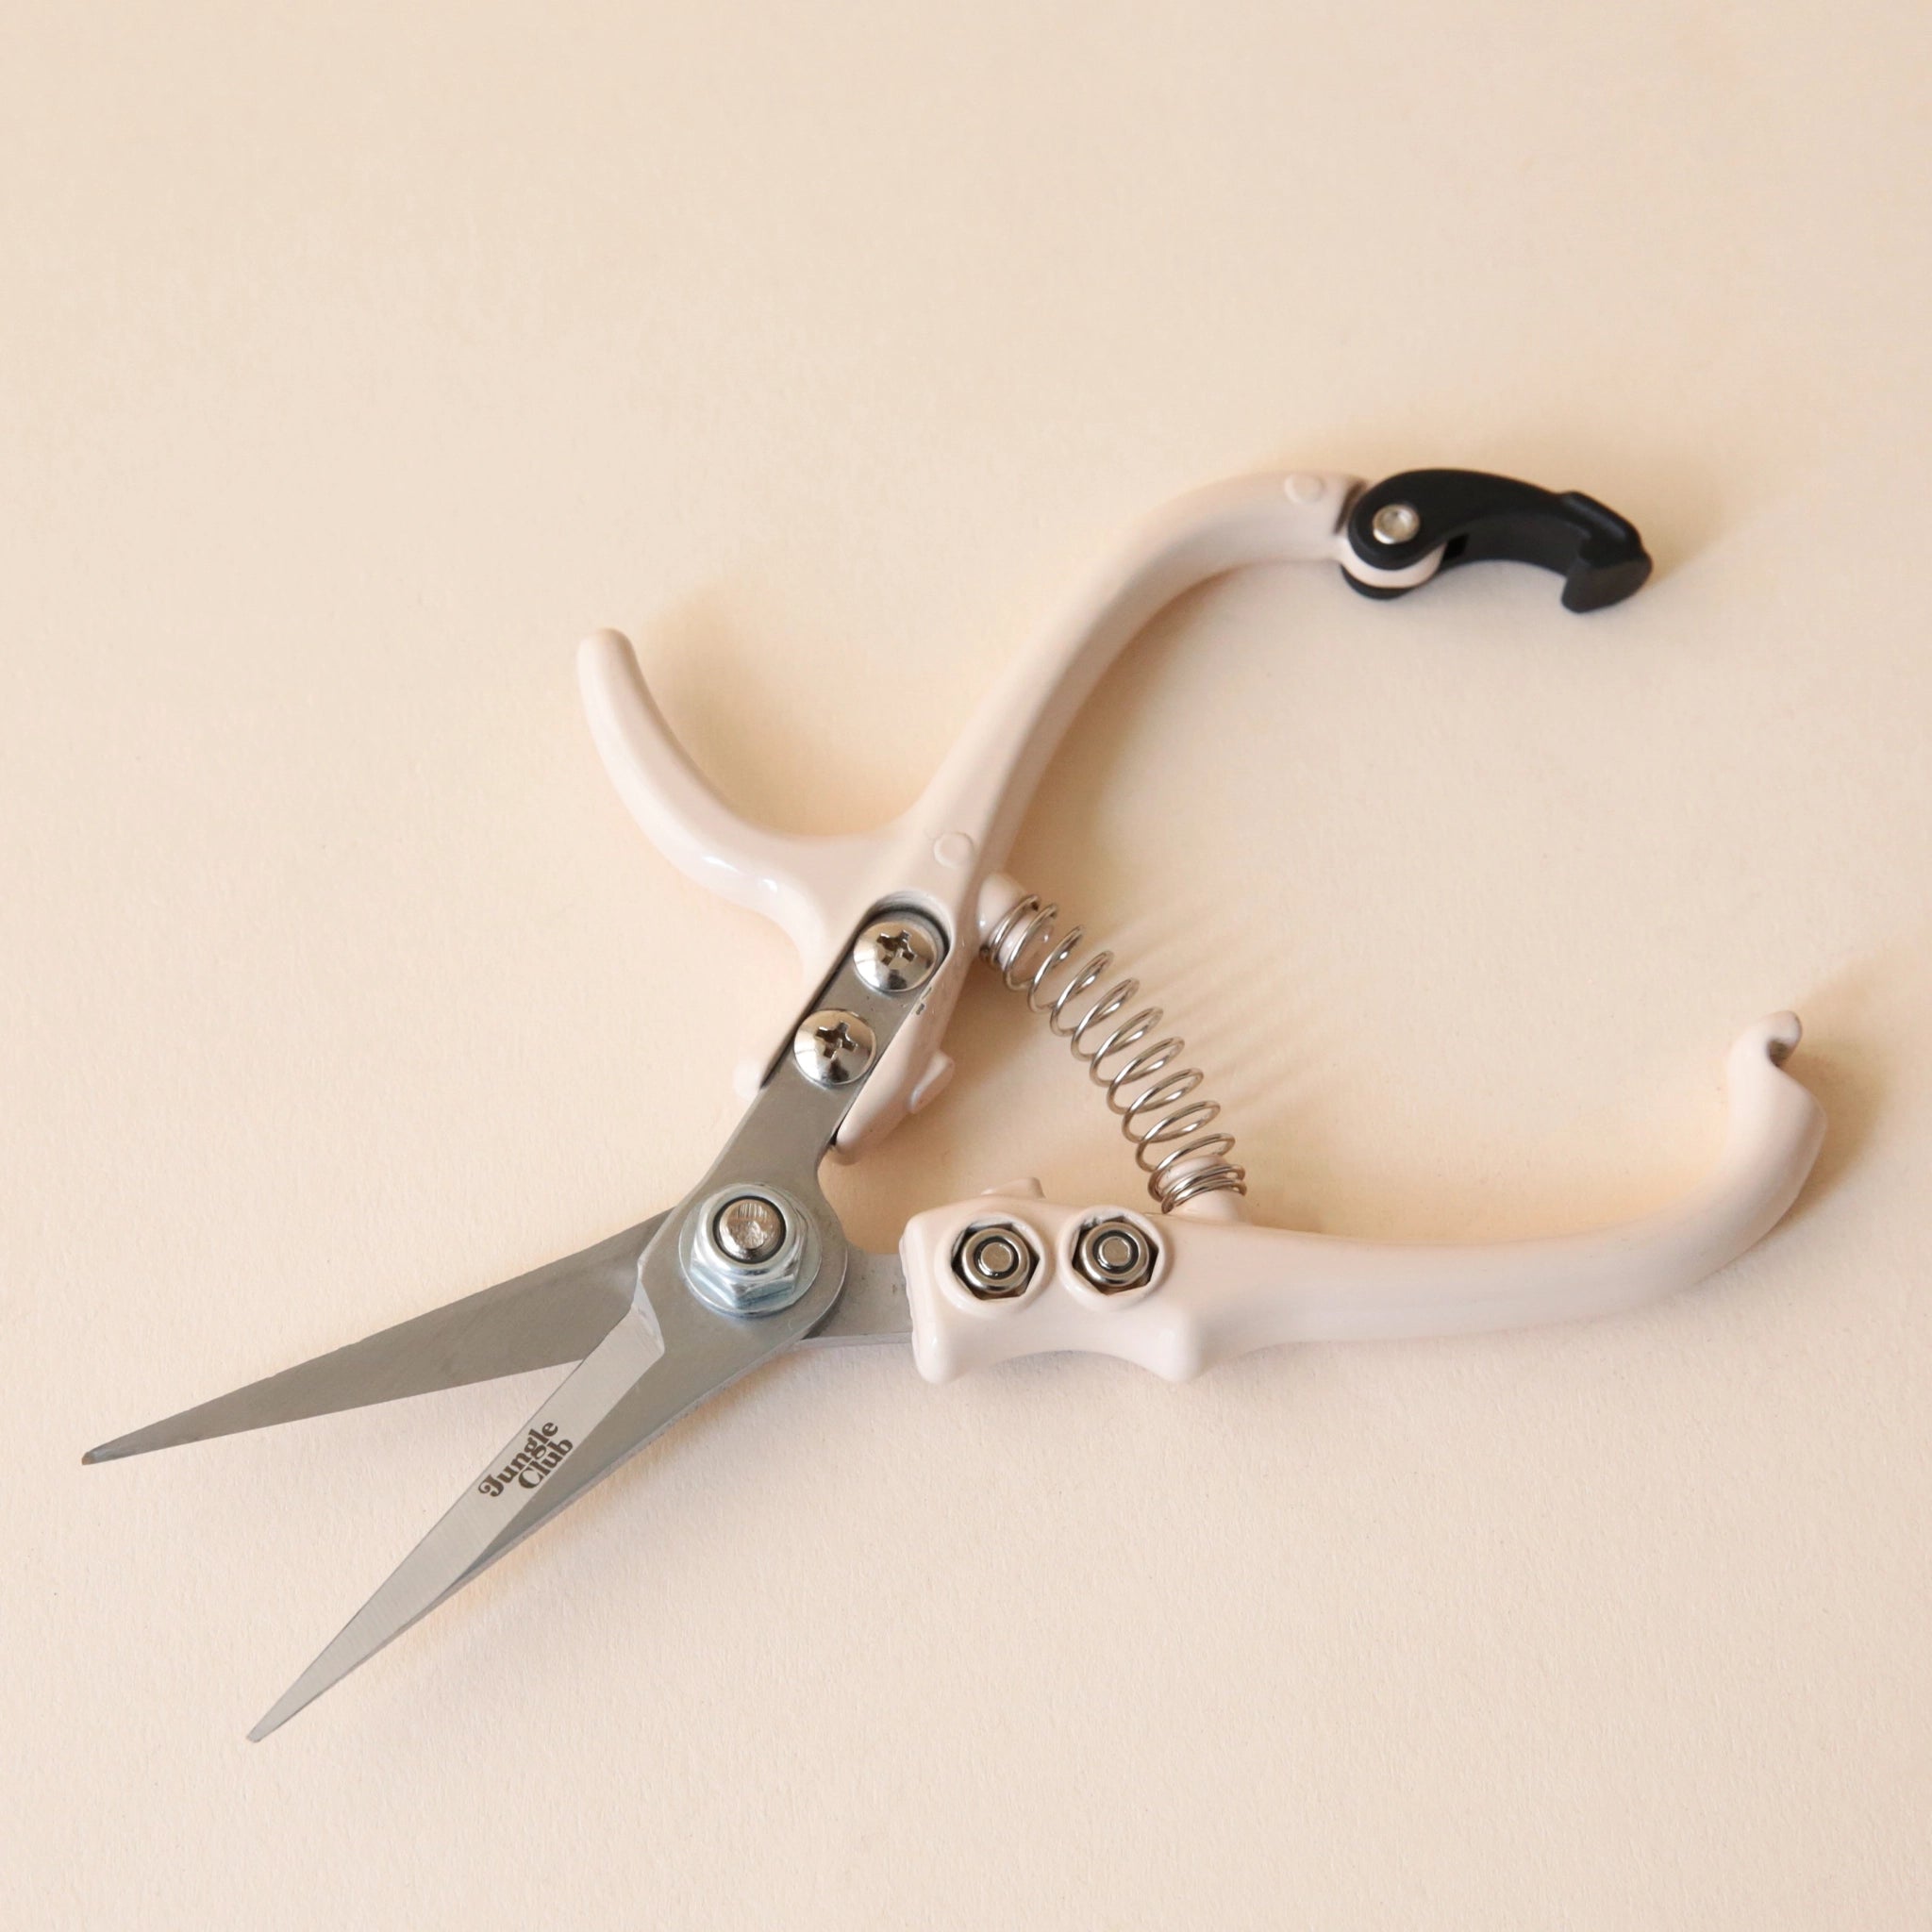 Pruning shears with a narrow tip, and light cream colored handle and a black clasp to connect when shears are not in use. There is small black text on the side of the shears that read, "Jungle Club".